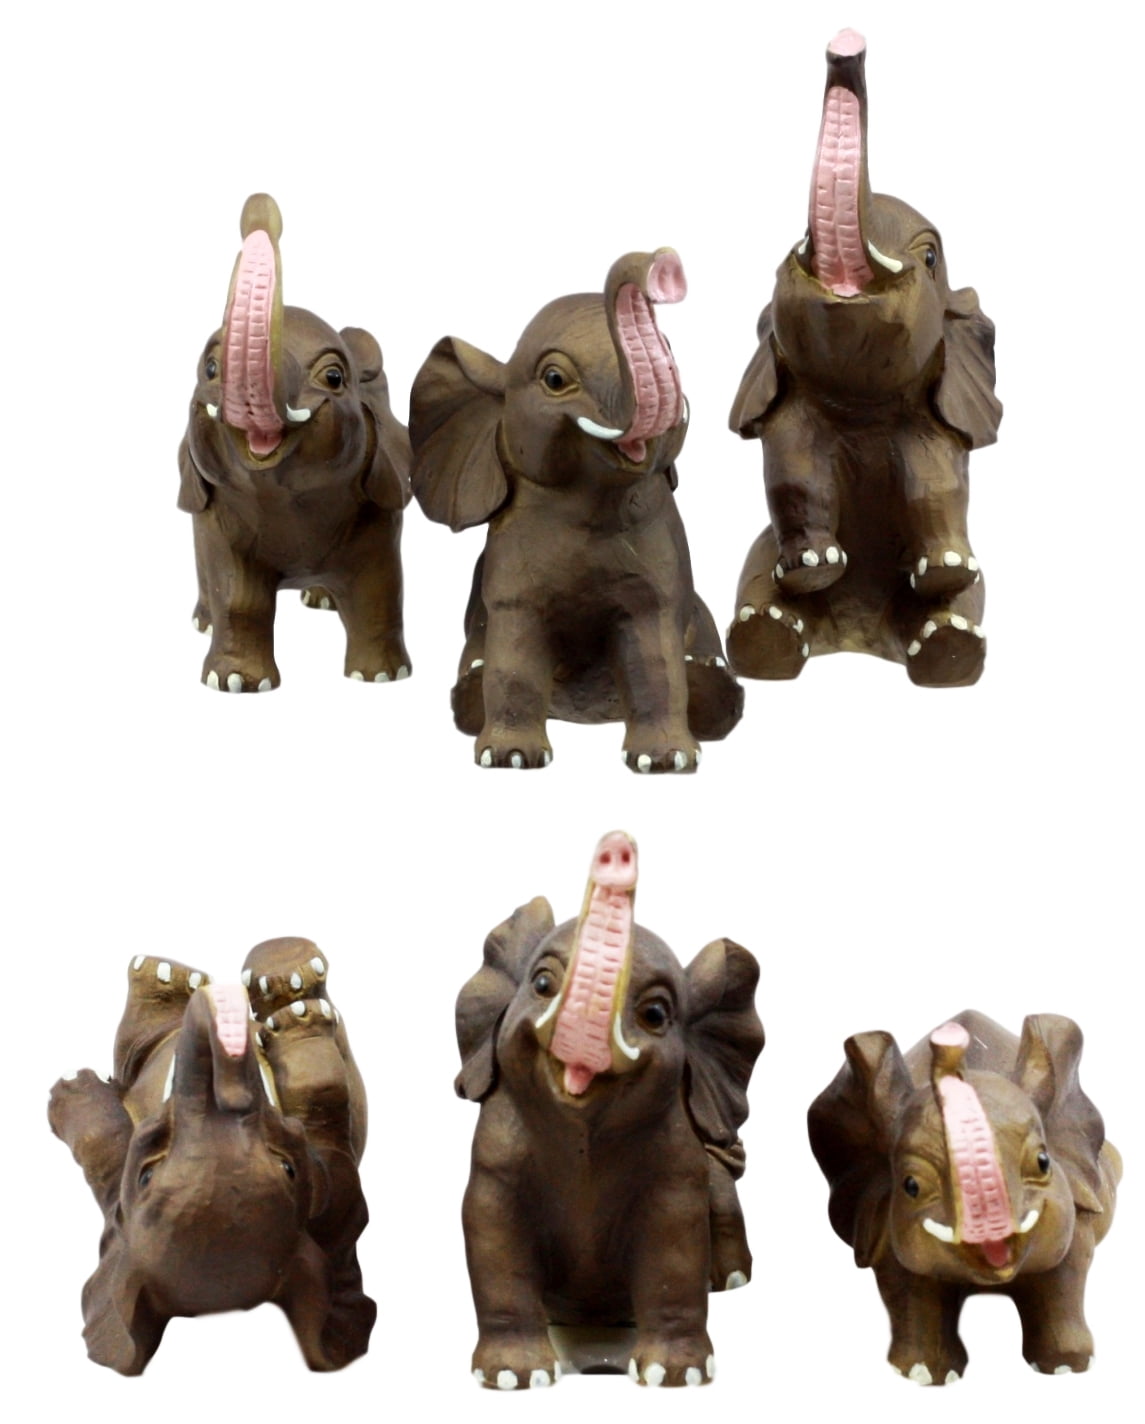 6.5 6.5 GSC StealStreet SS-G-54135 Small Polyresin Elephant With Trunk Up Figurine Statue